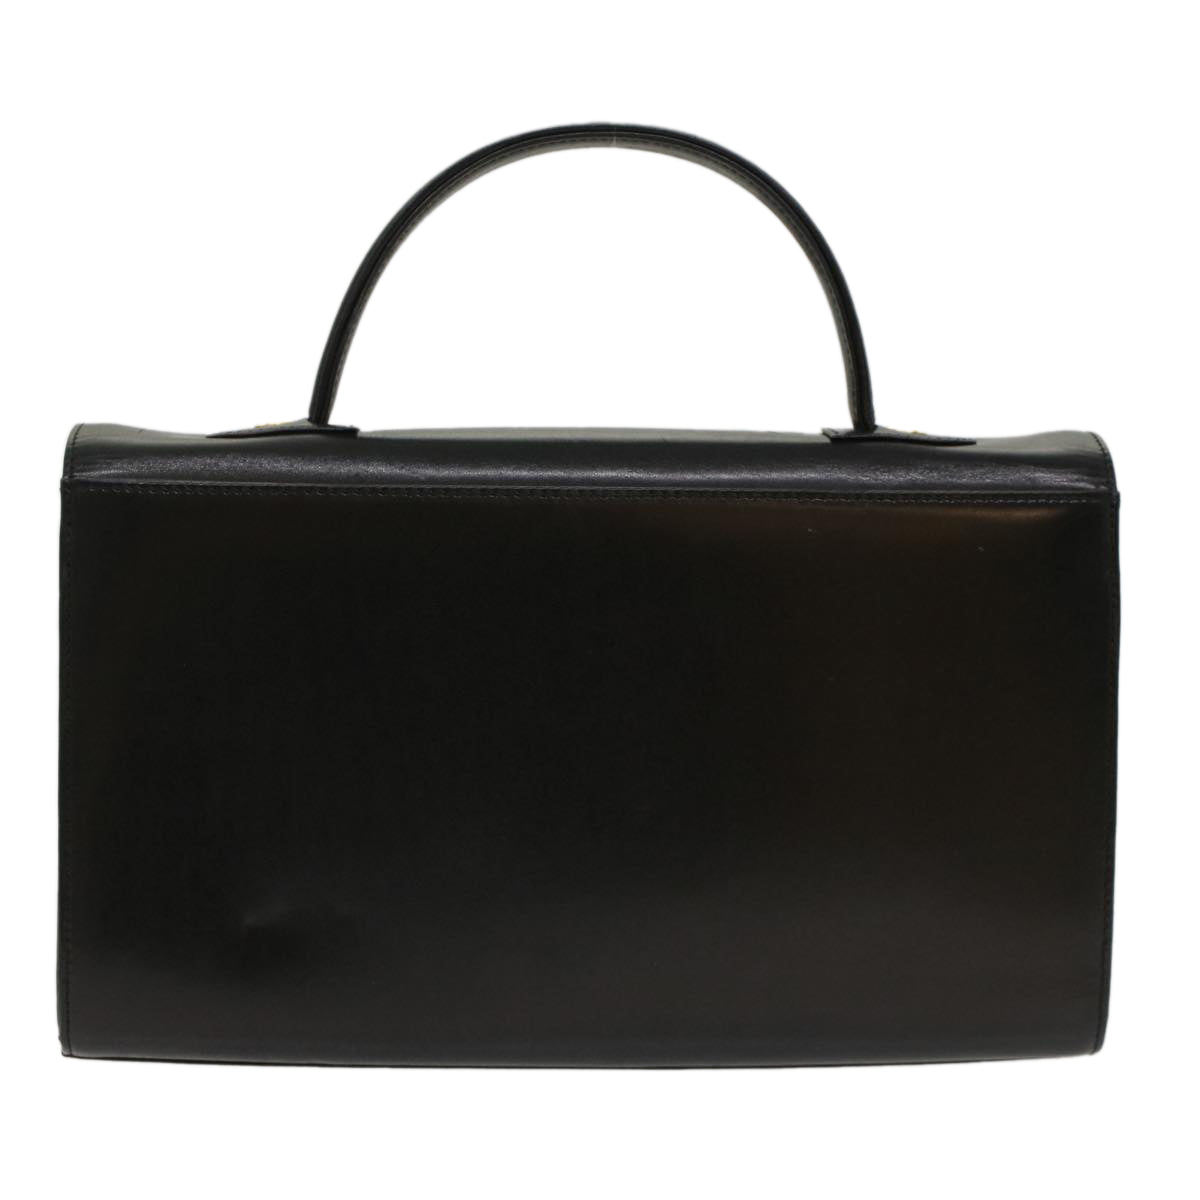 GIVENCHY Hand Bag Leather Black Auth am4887